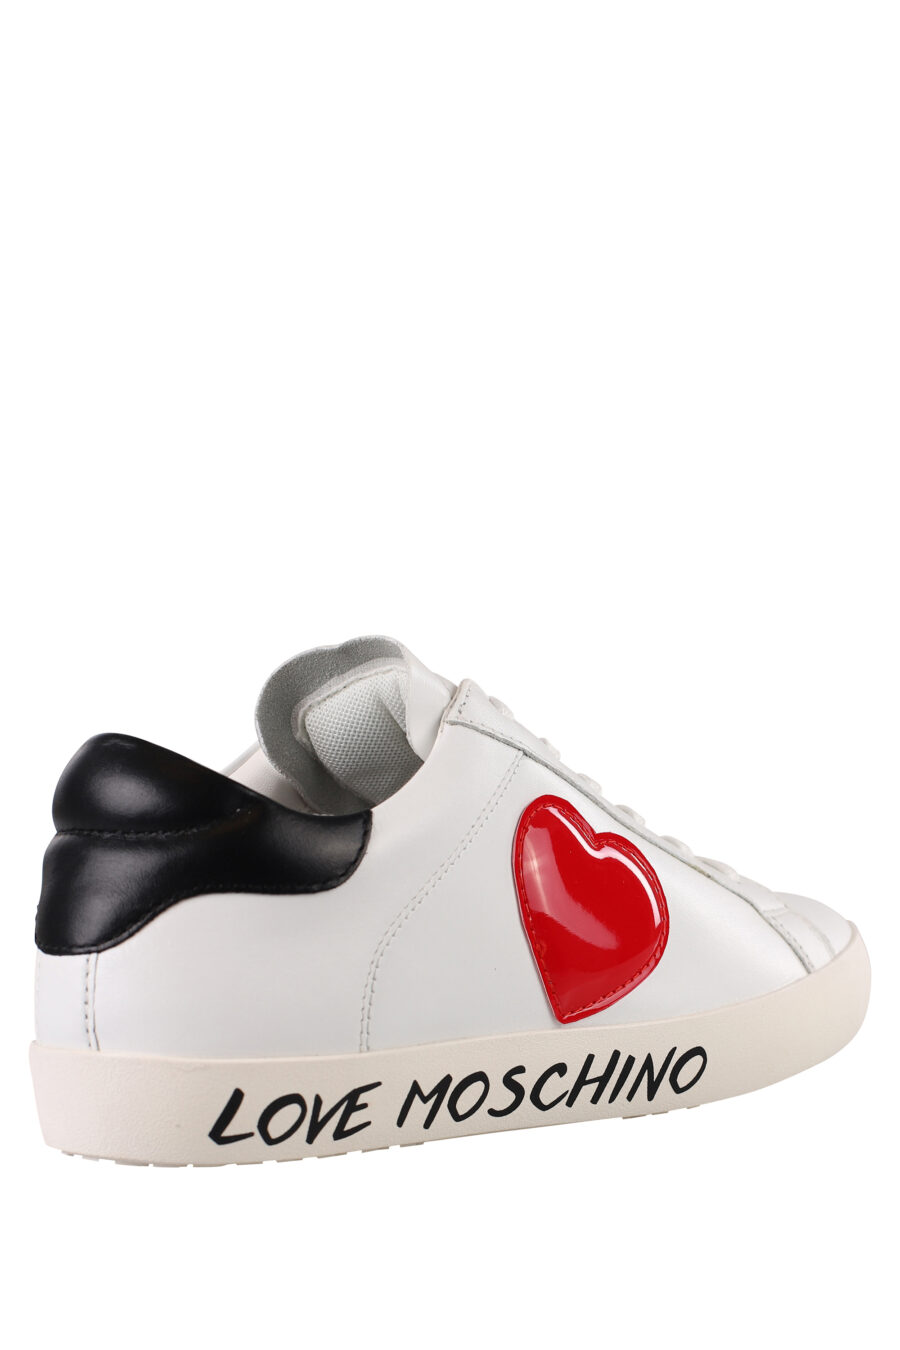 White trainers with red heart on the side and logo on the sole - IMG 1207